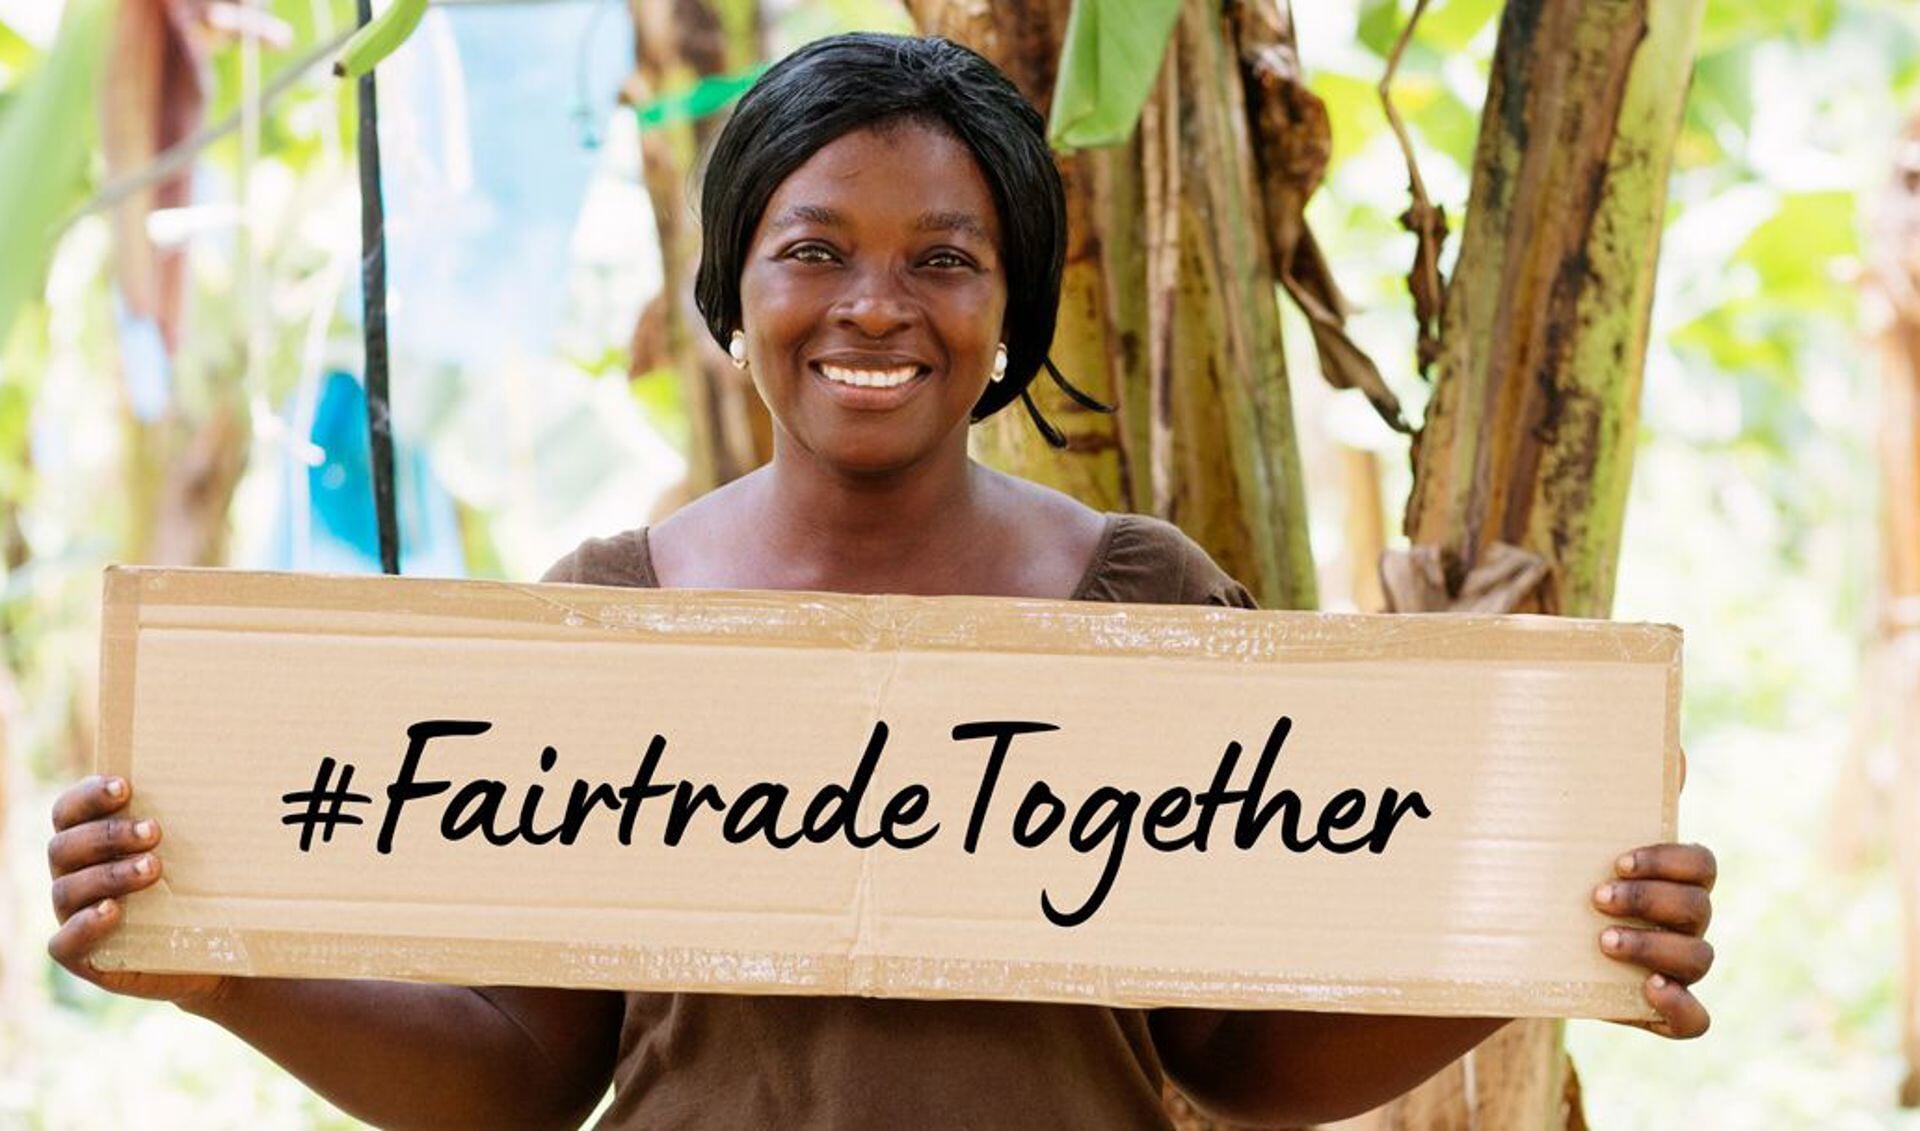 #Fairtrade Together